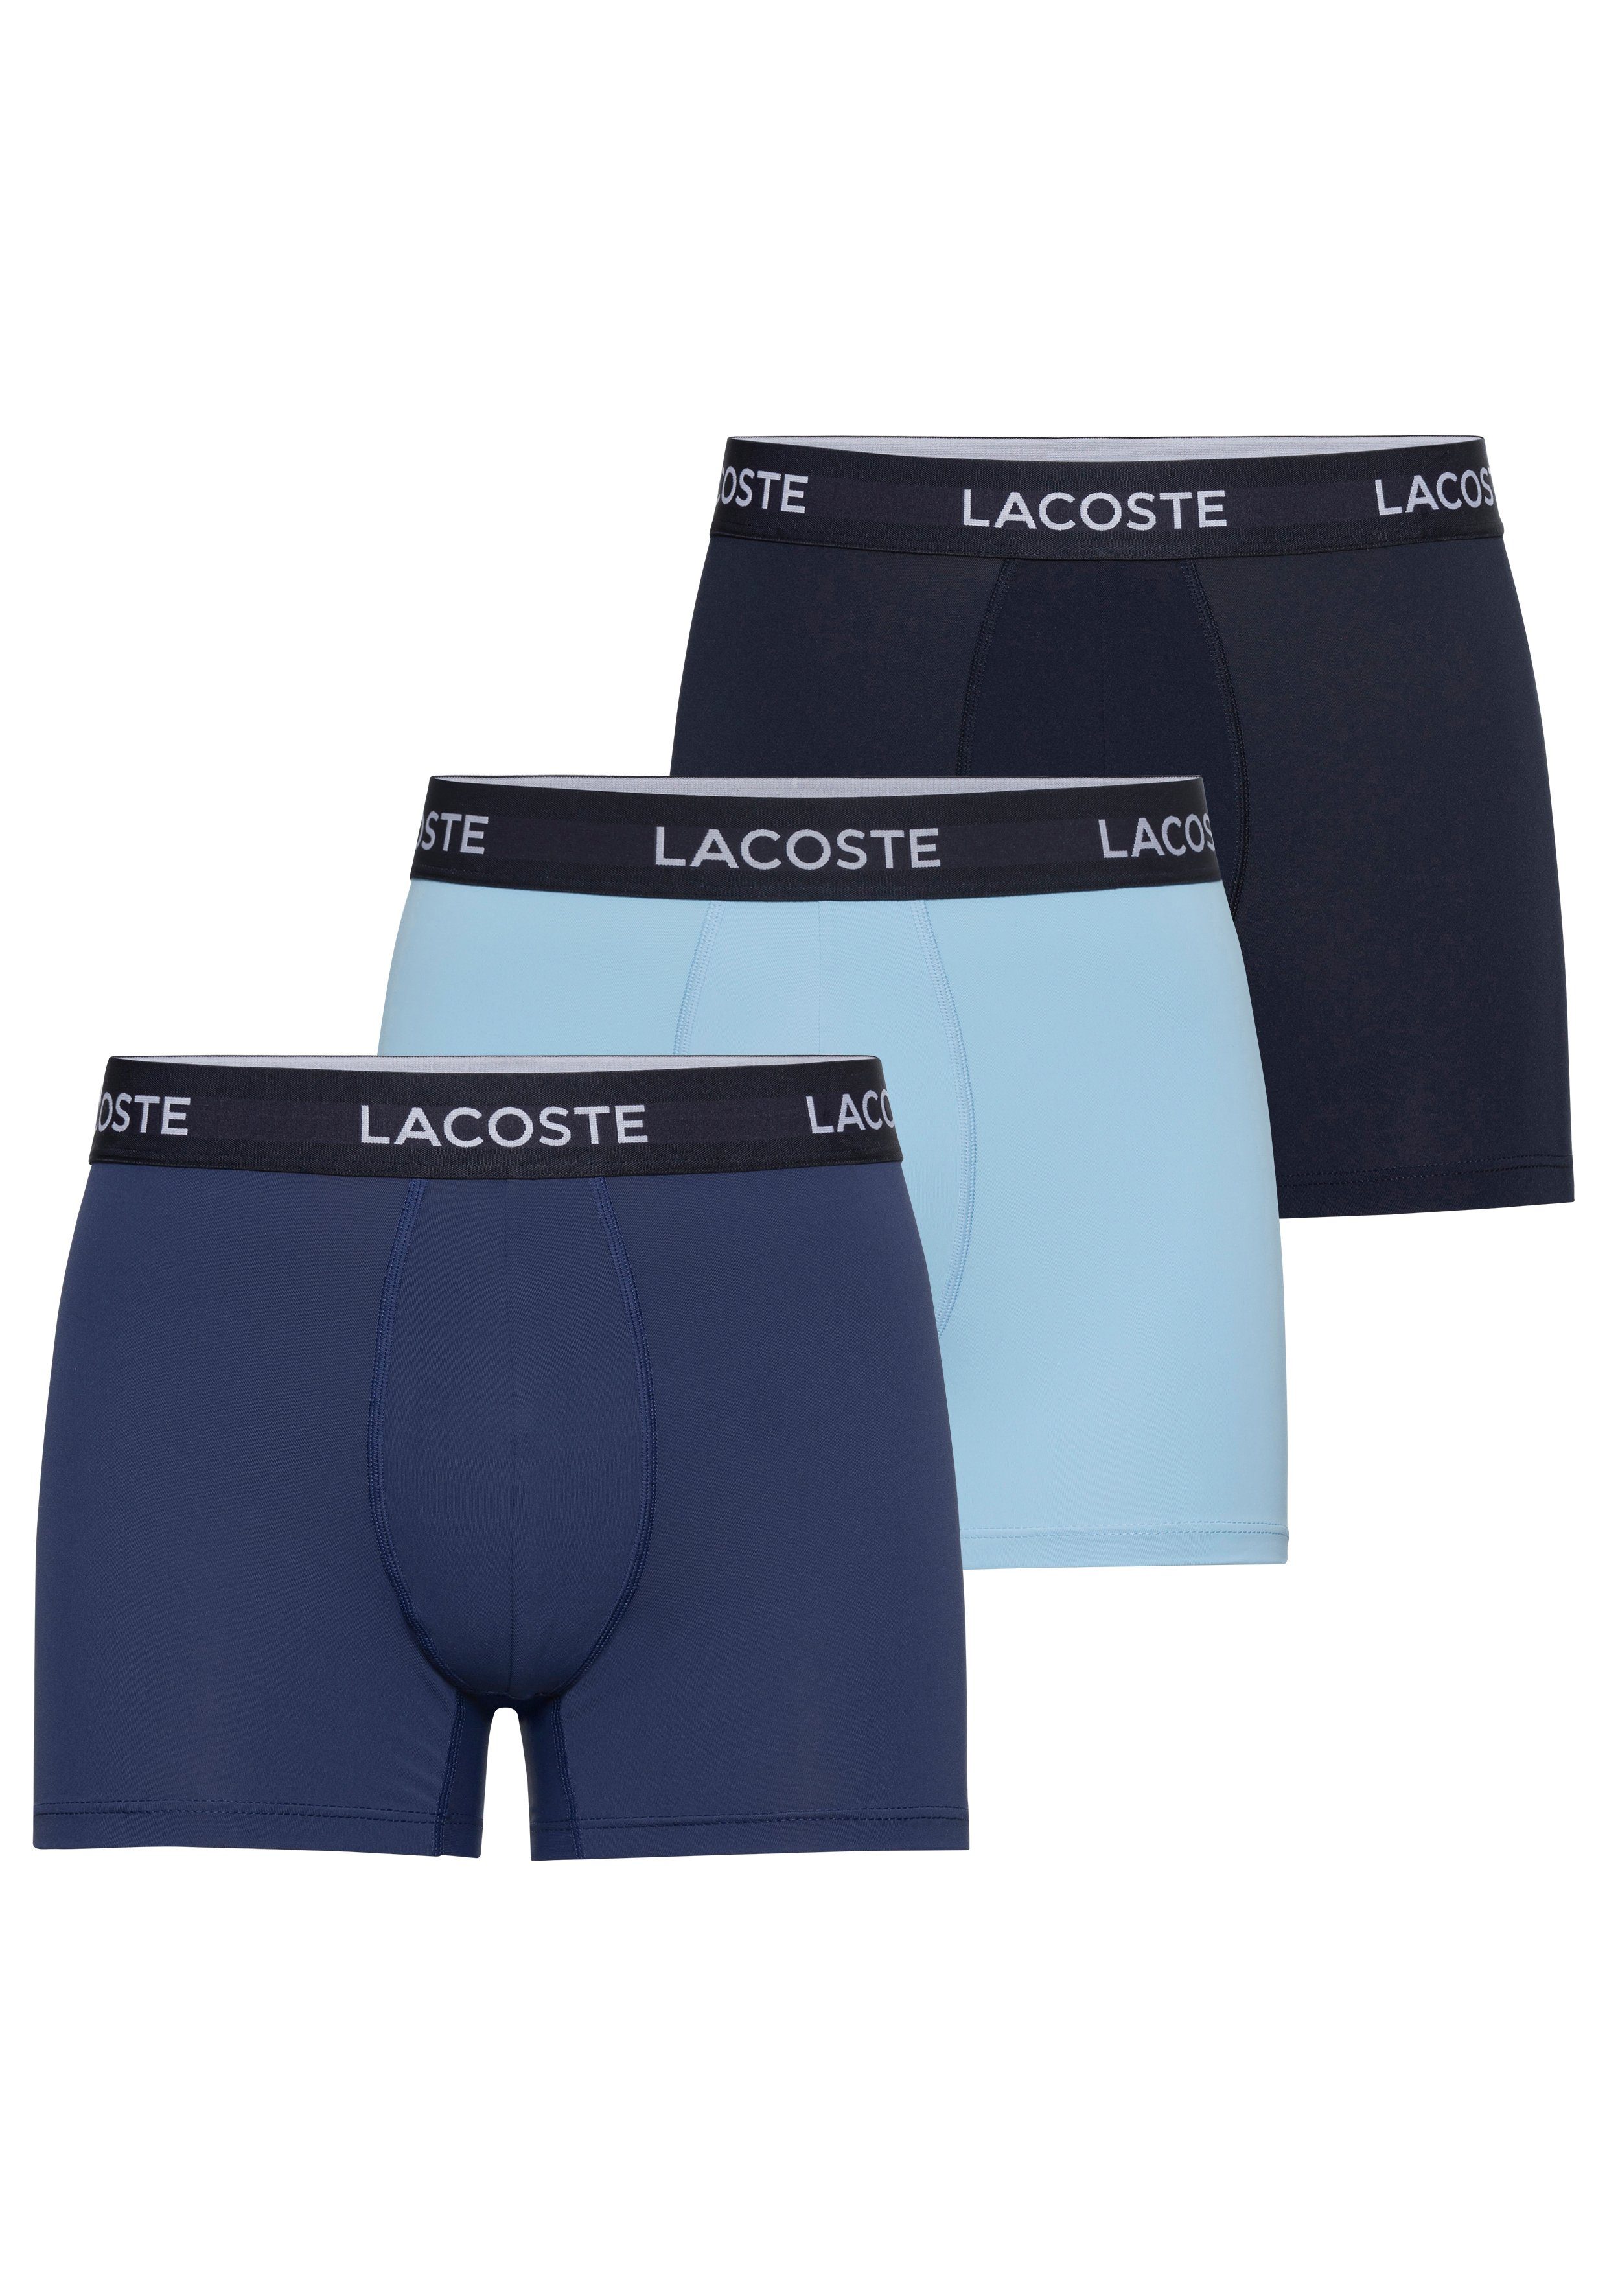 Lacoste Boxer (Packung, 3-St) / blue / VUC blue navy light